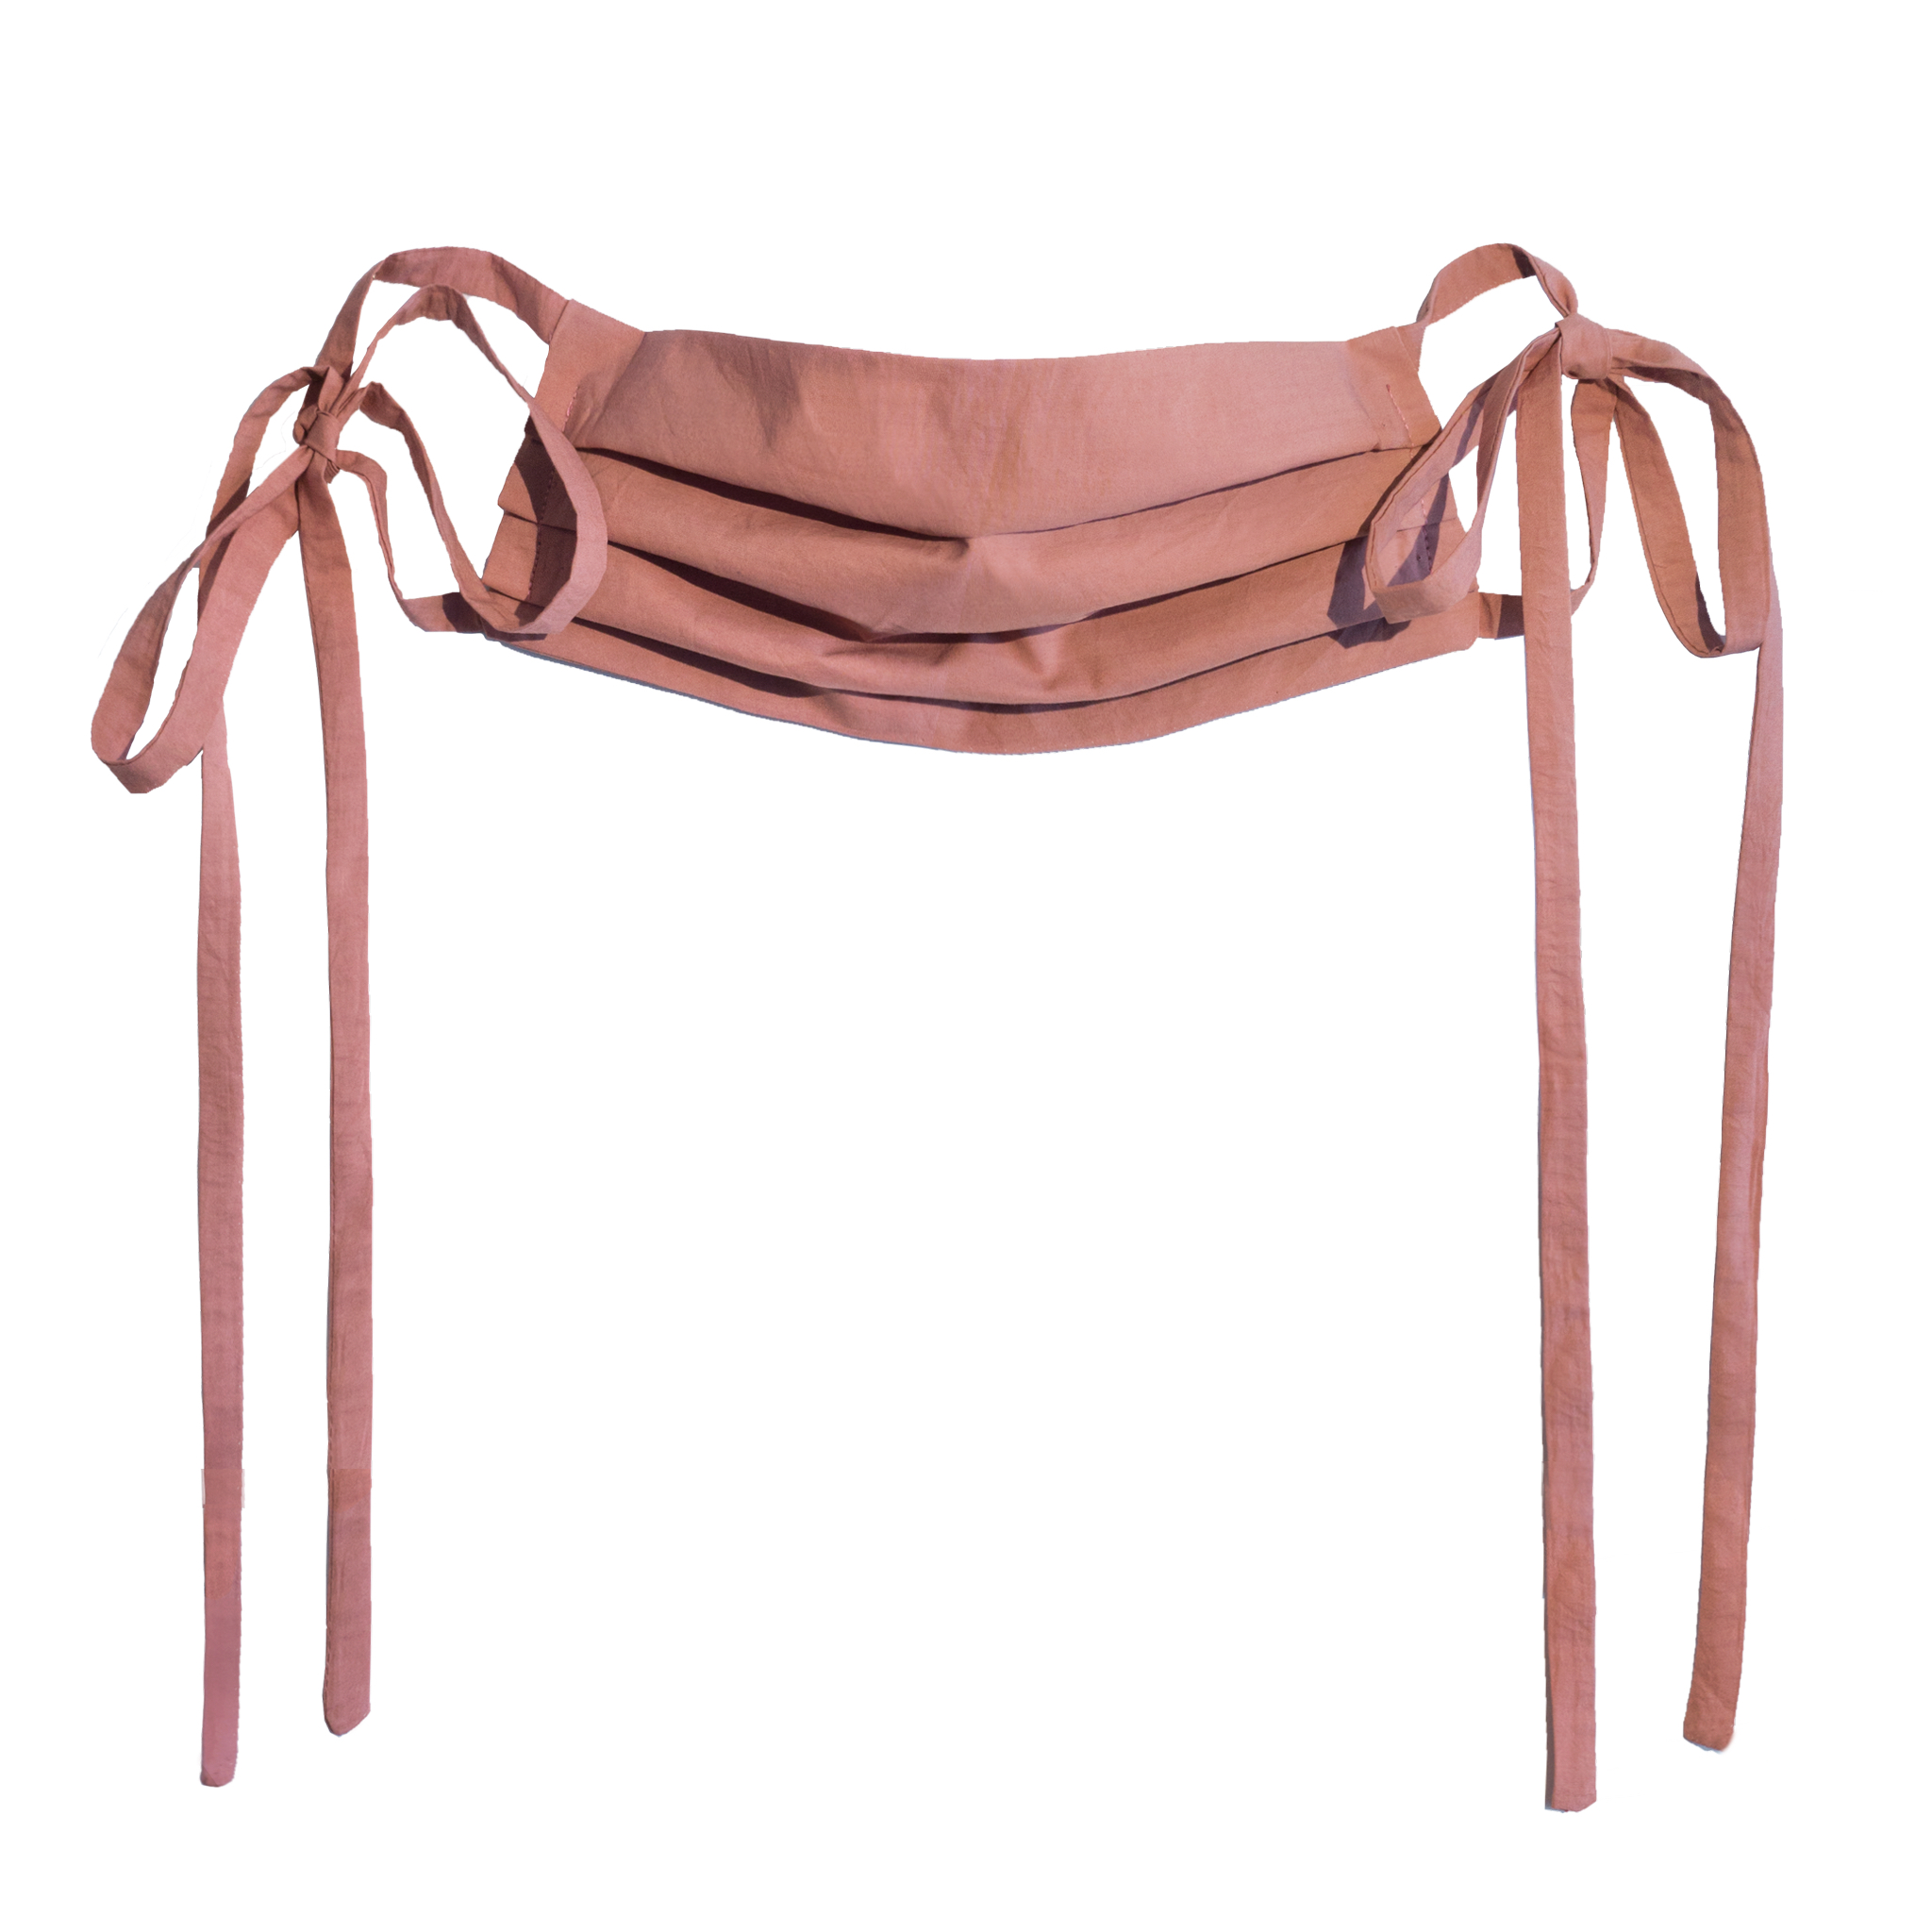 a mauve face mask with elongated decorative strings 